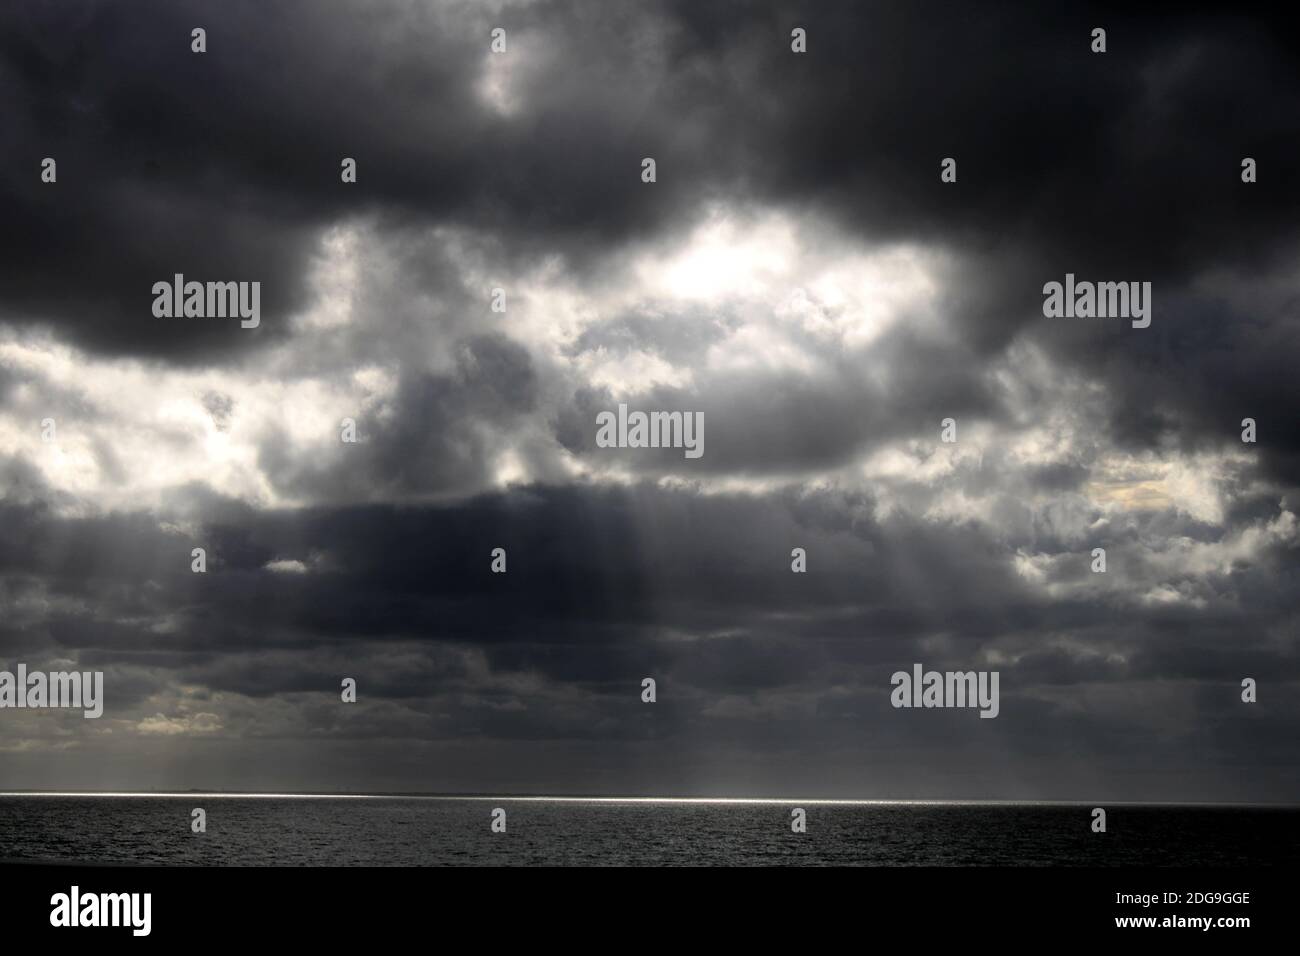 soft subtle rays of sunlight filter through the thick dark clouds down onto the surface of the large lake Stock Photo